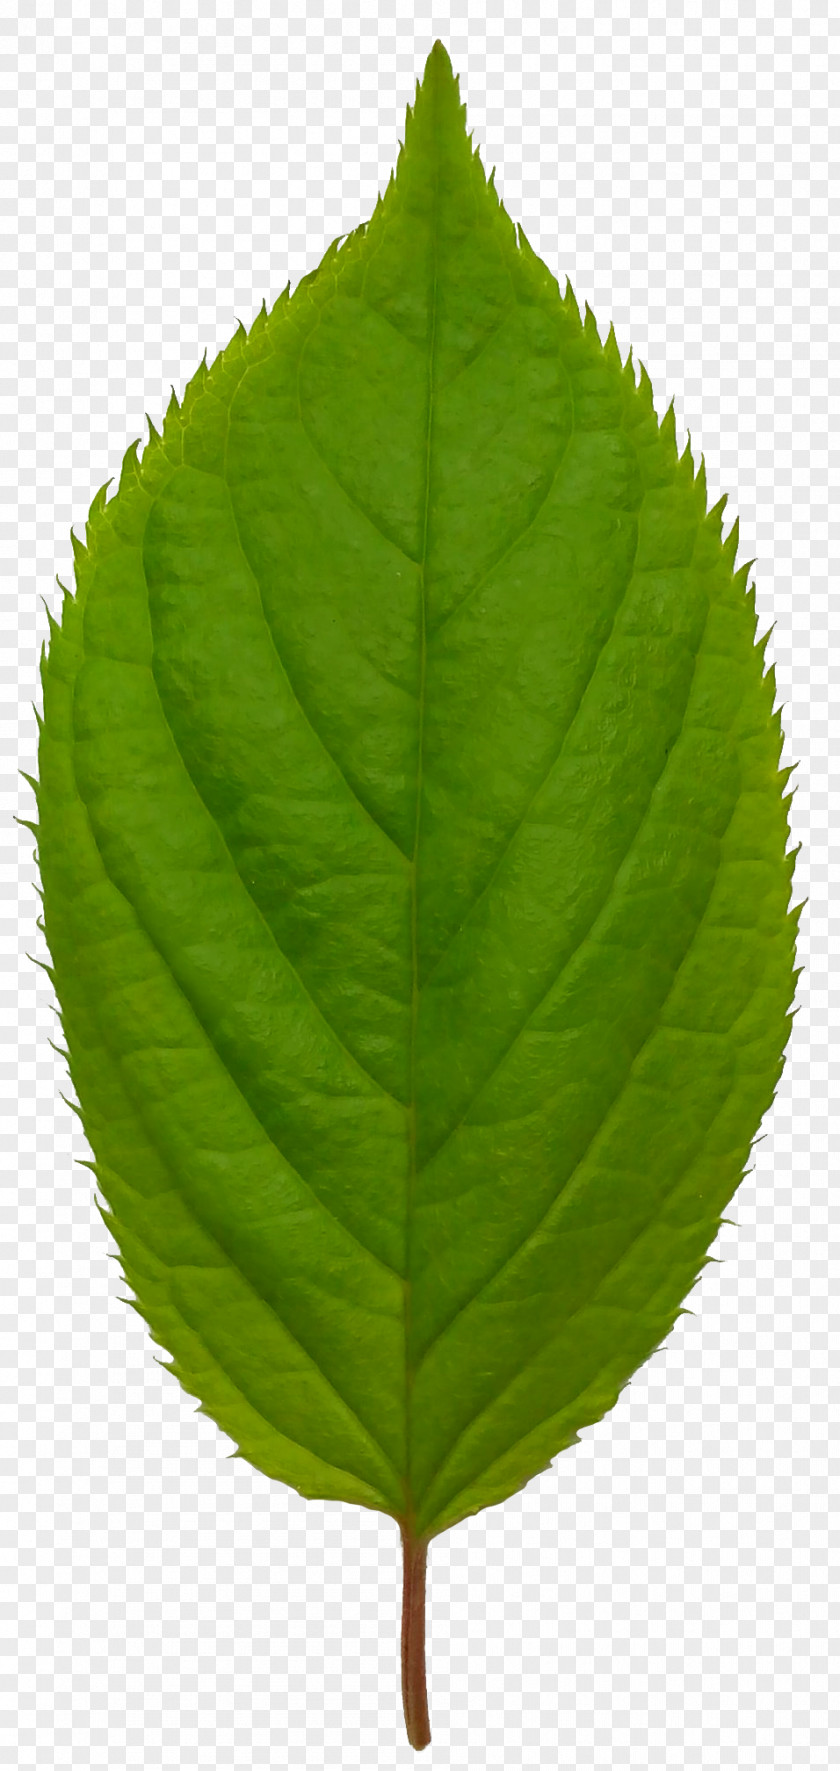 Green Leaves World Of Tanks Texture Mapping 3D Computer Graphics Leaflet PNG